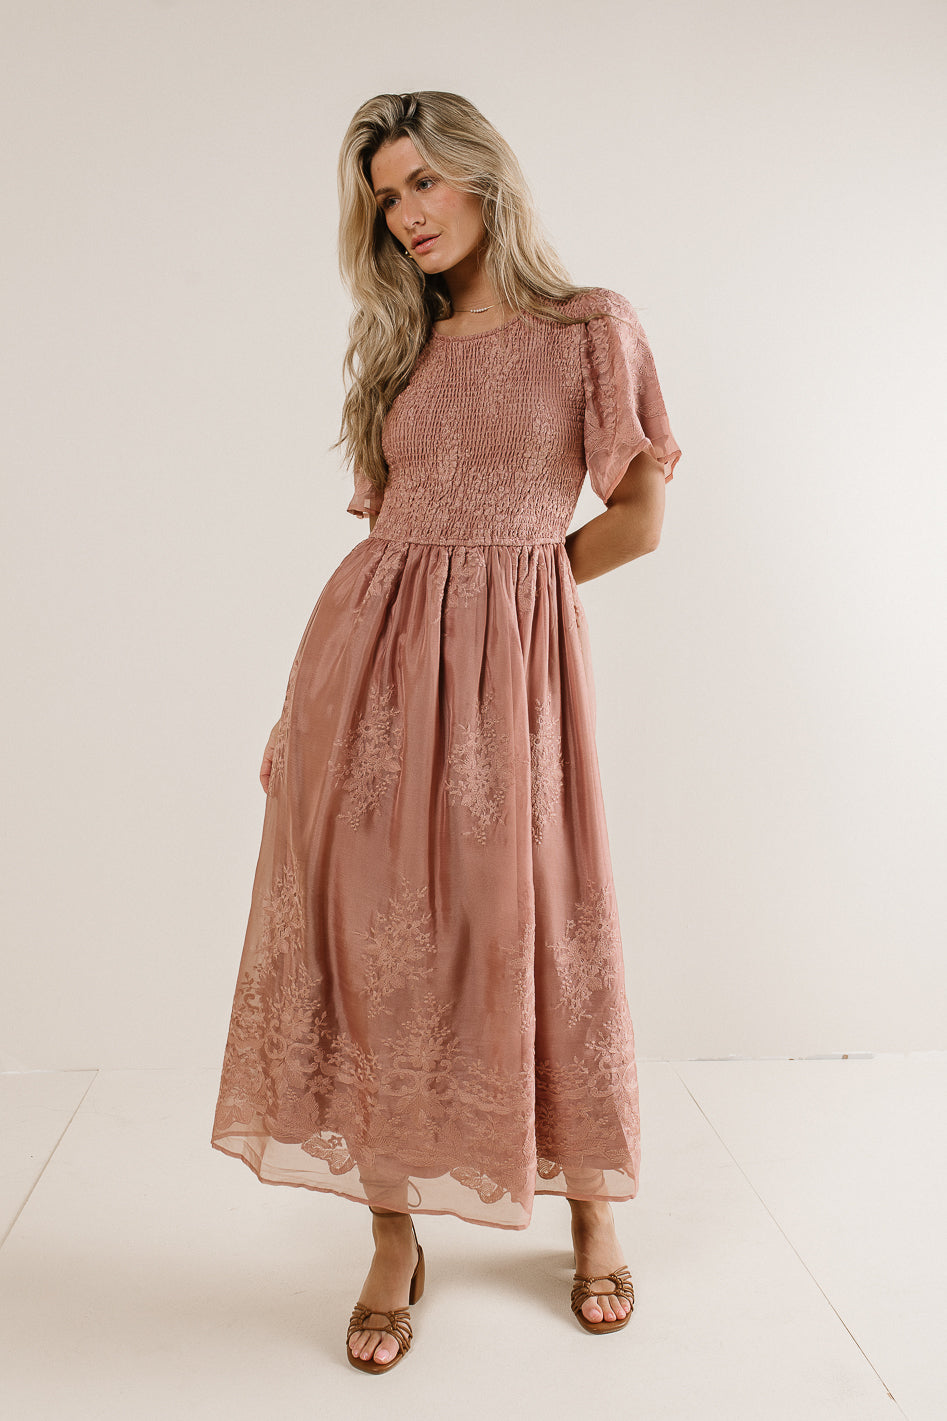 Image of Alora Embroidered Dress in Dusty Rose